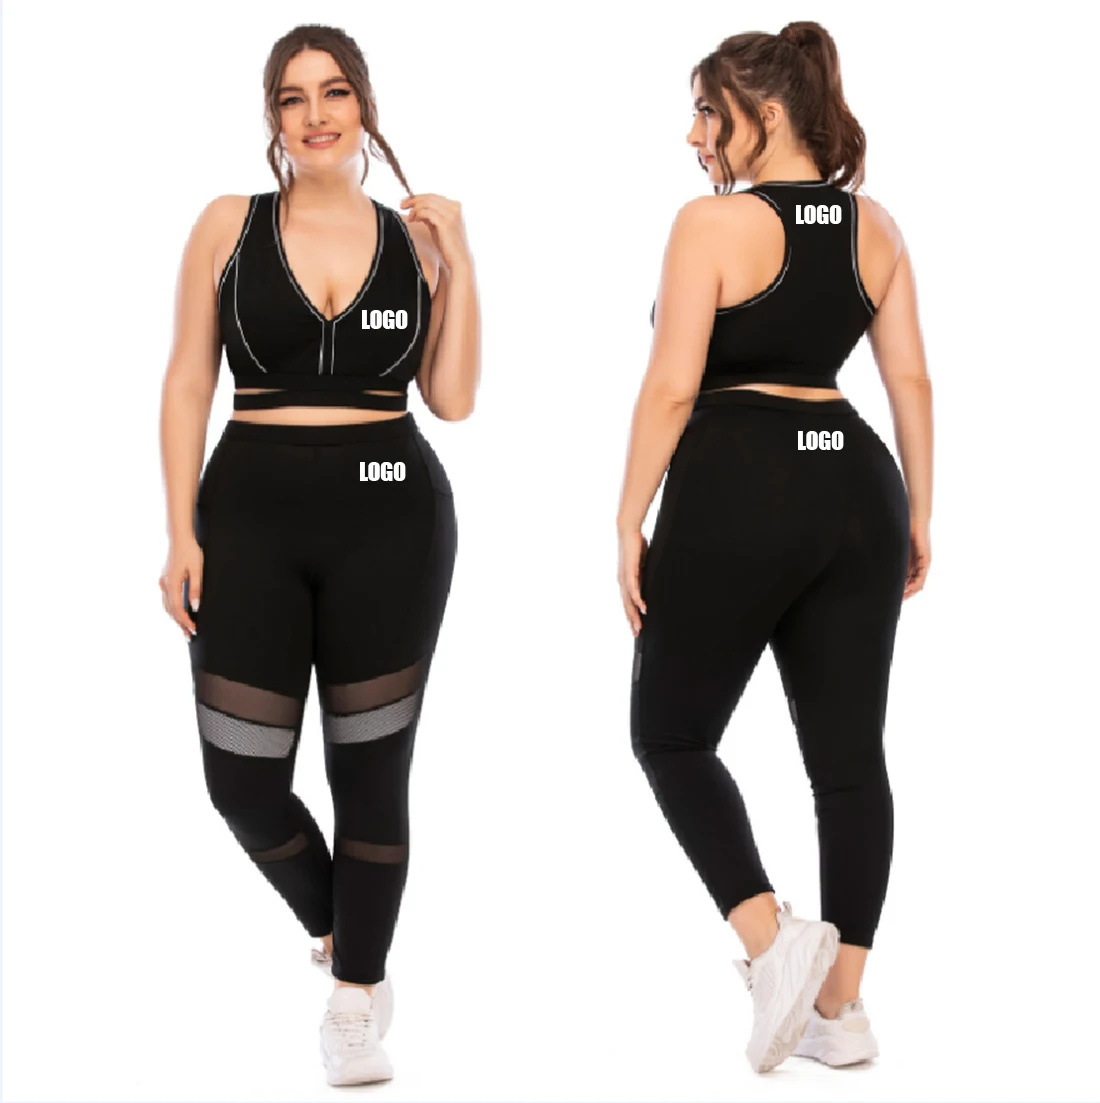 

Spandex Polyeste Custom Ladies Fitness Plus Size Activewear Sports Bra Xxxl Leggings 2 Pieces Gym Outfits Fat Women Yoga Sets, As pictures/customized colors